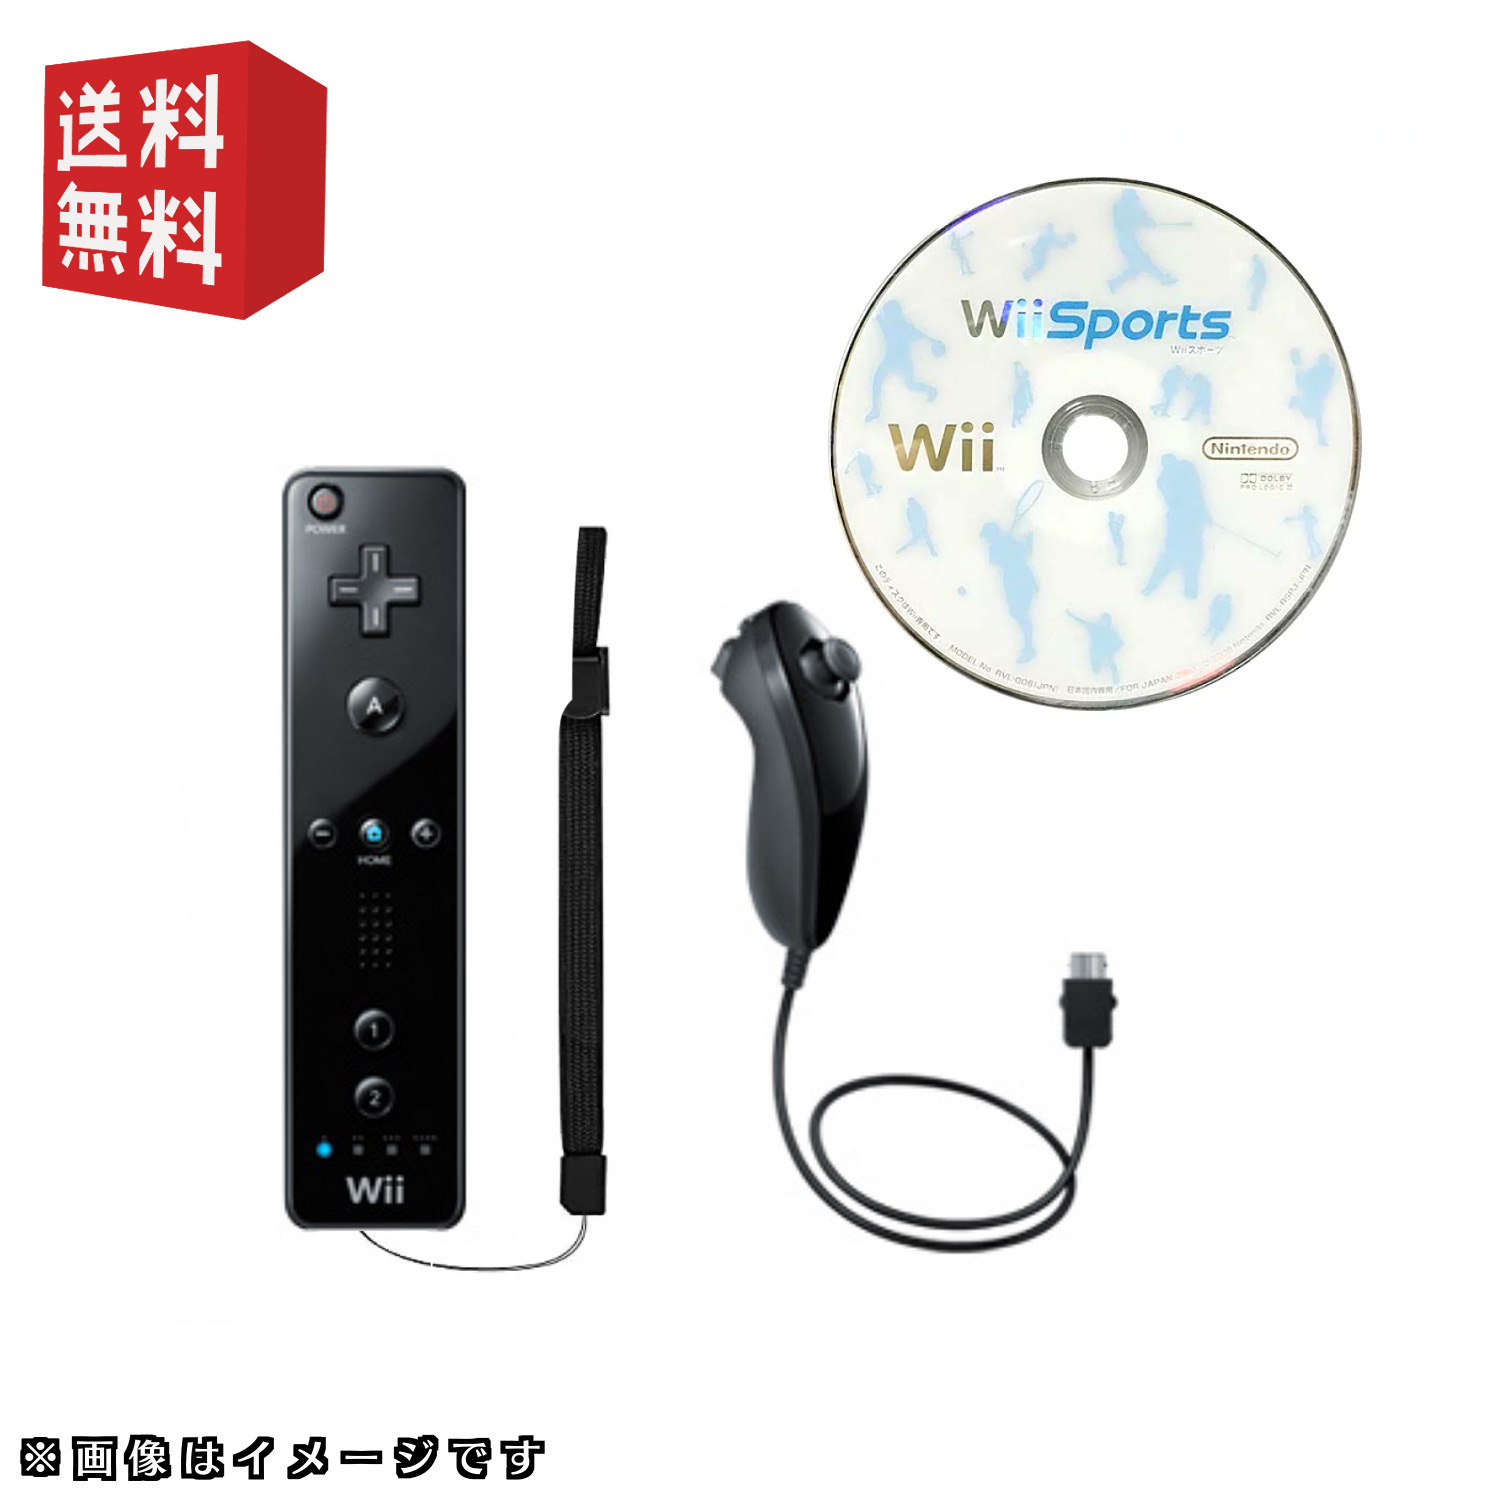 wiiソフト「wii sports」＋ wiiリモコン ＋ ヌンチャク セット☆選べる